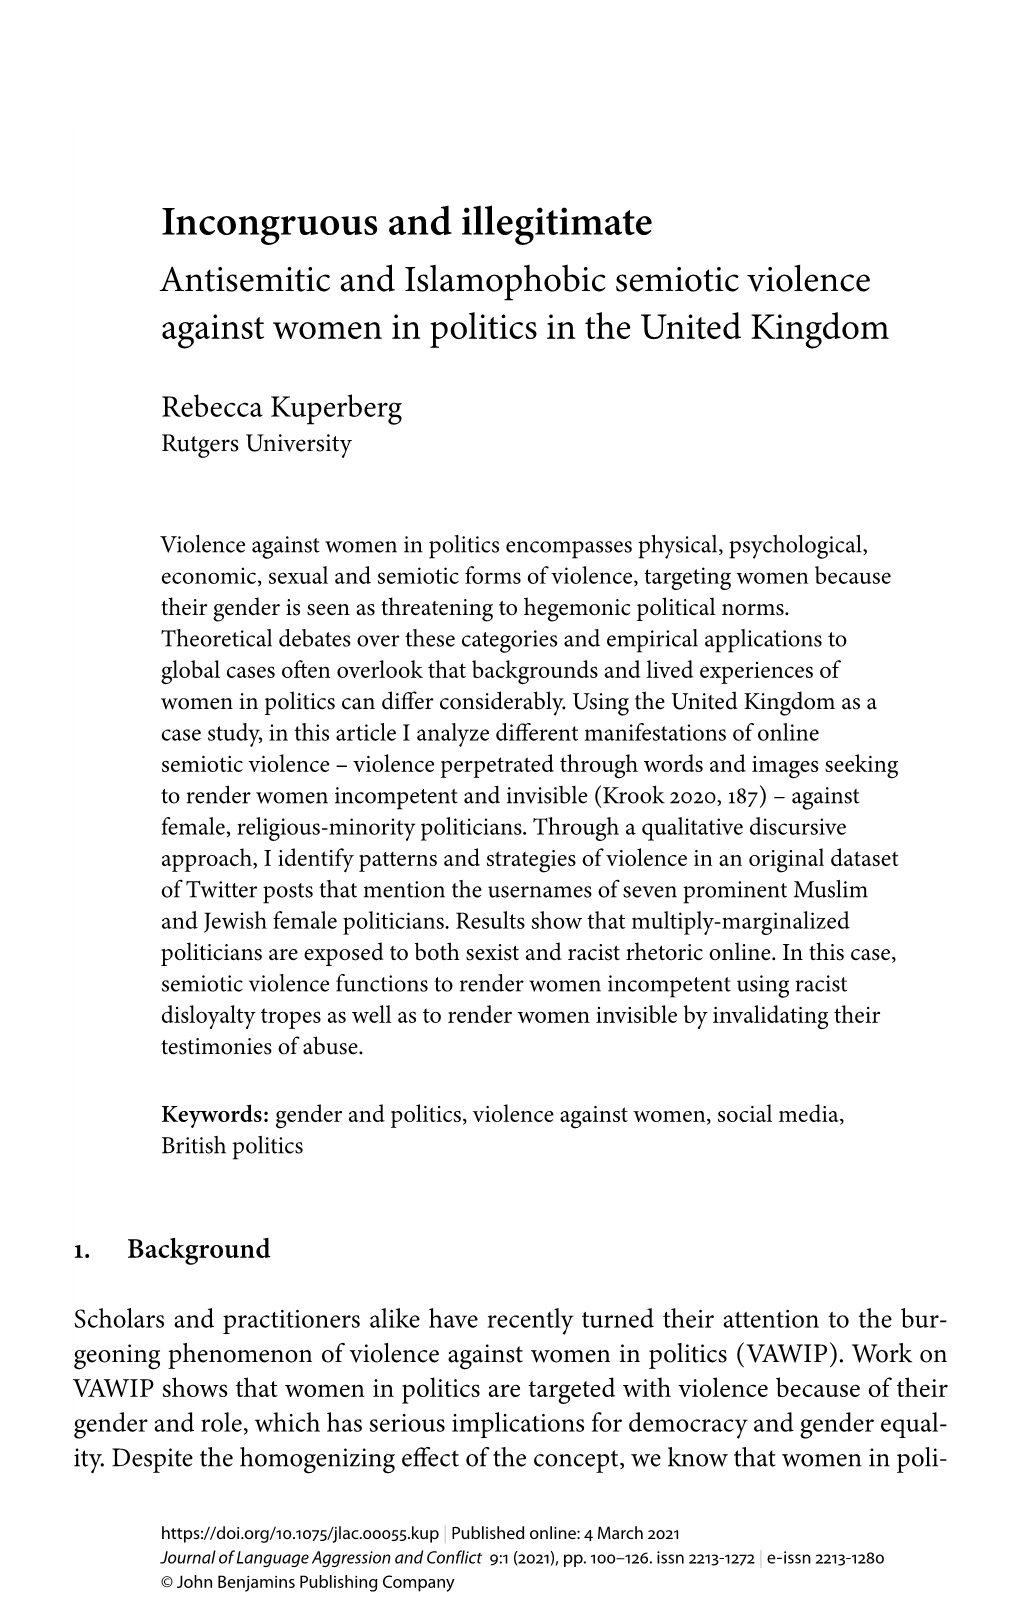 Incongruous and Illegitimate: Antisemitic and Islamophobic Semiotic Violence Against Women in Politics in the United Kingdom